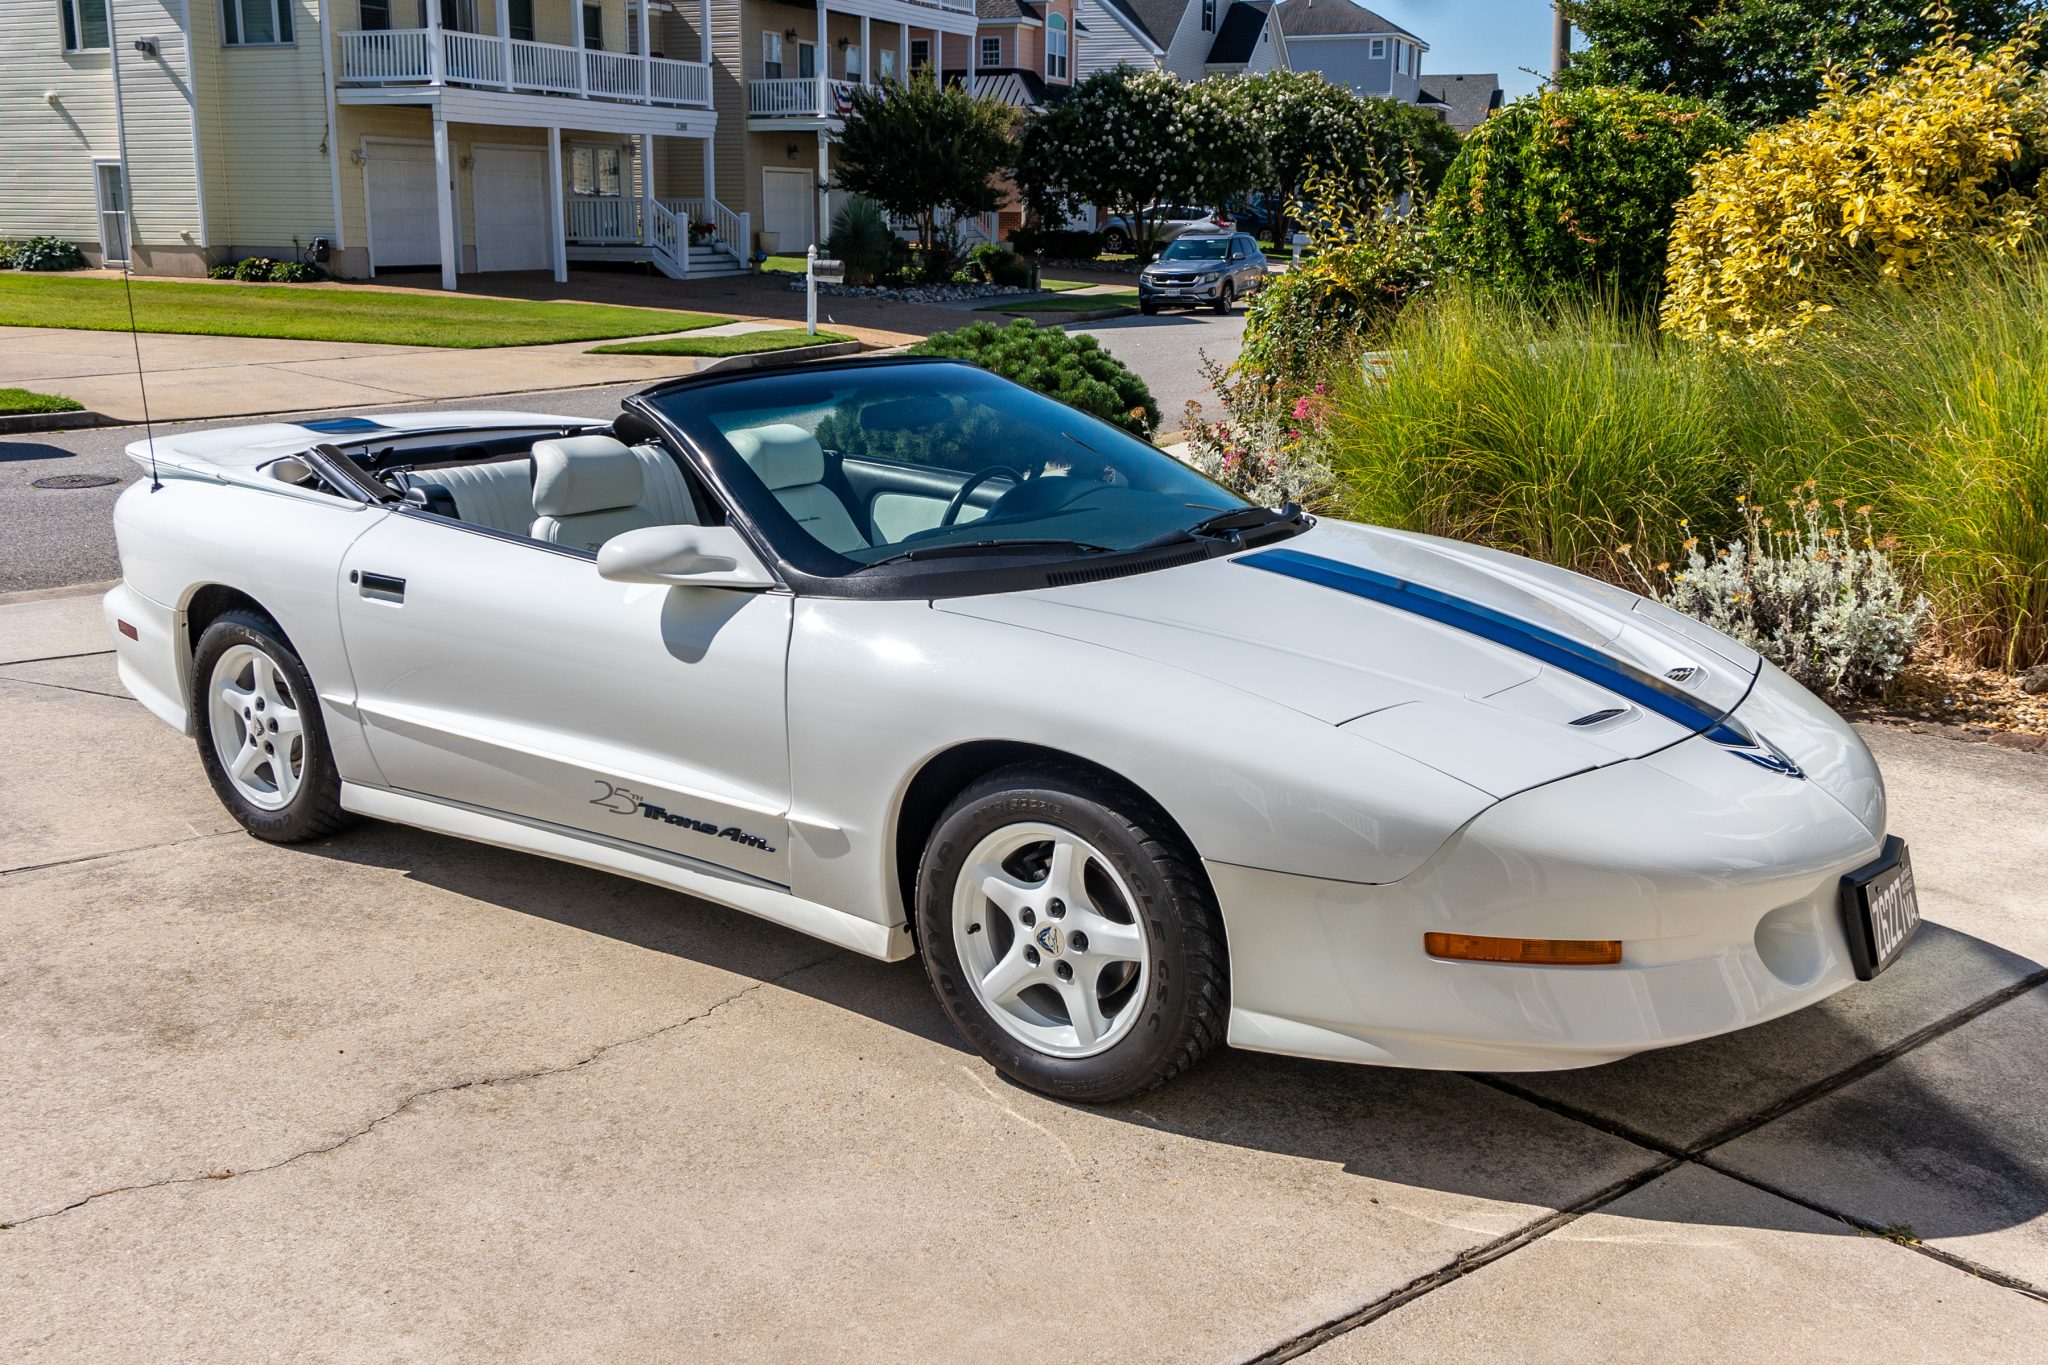 Used Original-Owner 1994 Pontiac Firebird Trans Am GT 25th Anniversary Convertible Review